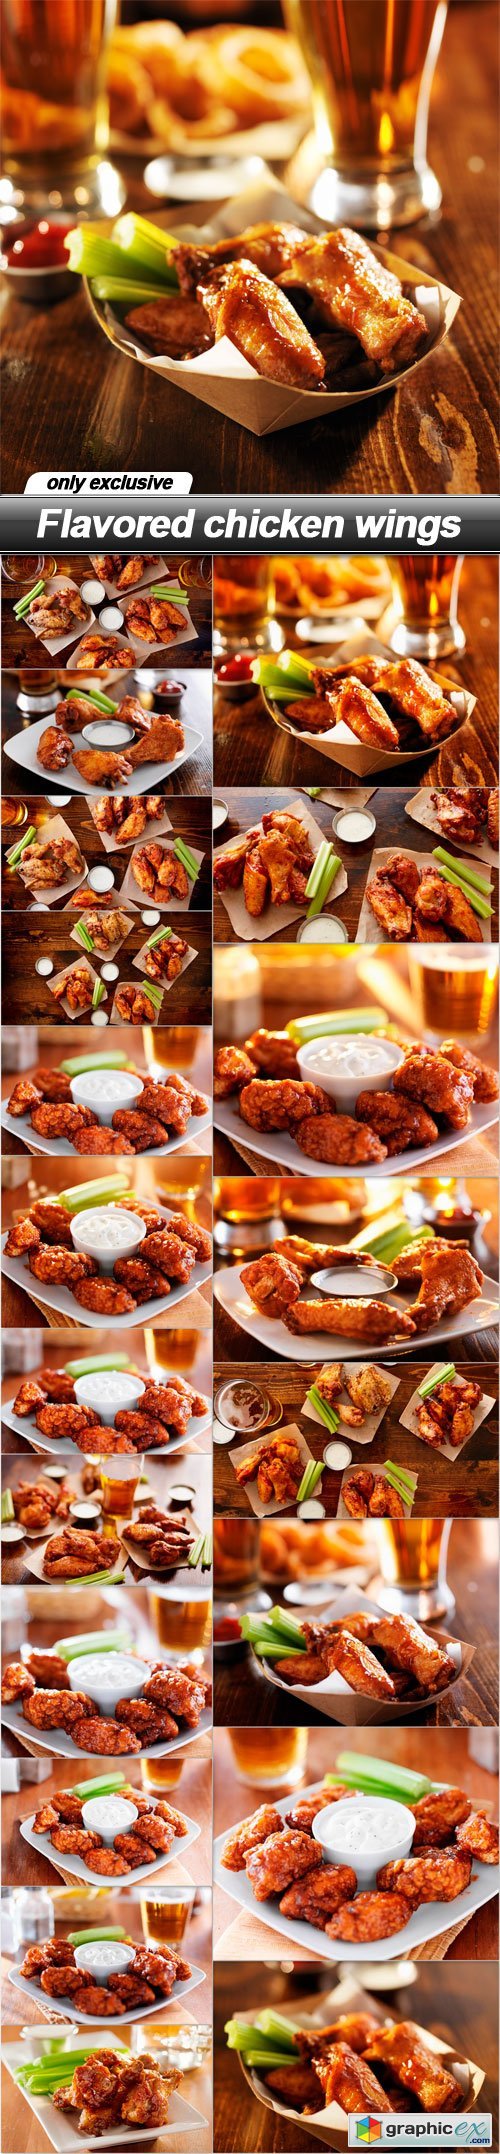 Flavored chicken wings - 20 UHQ JPEG